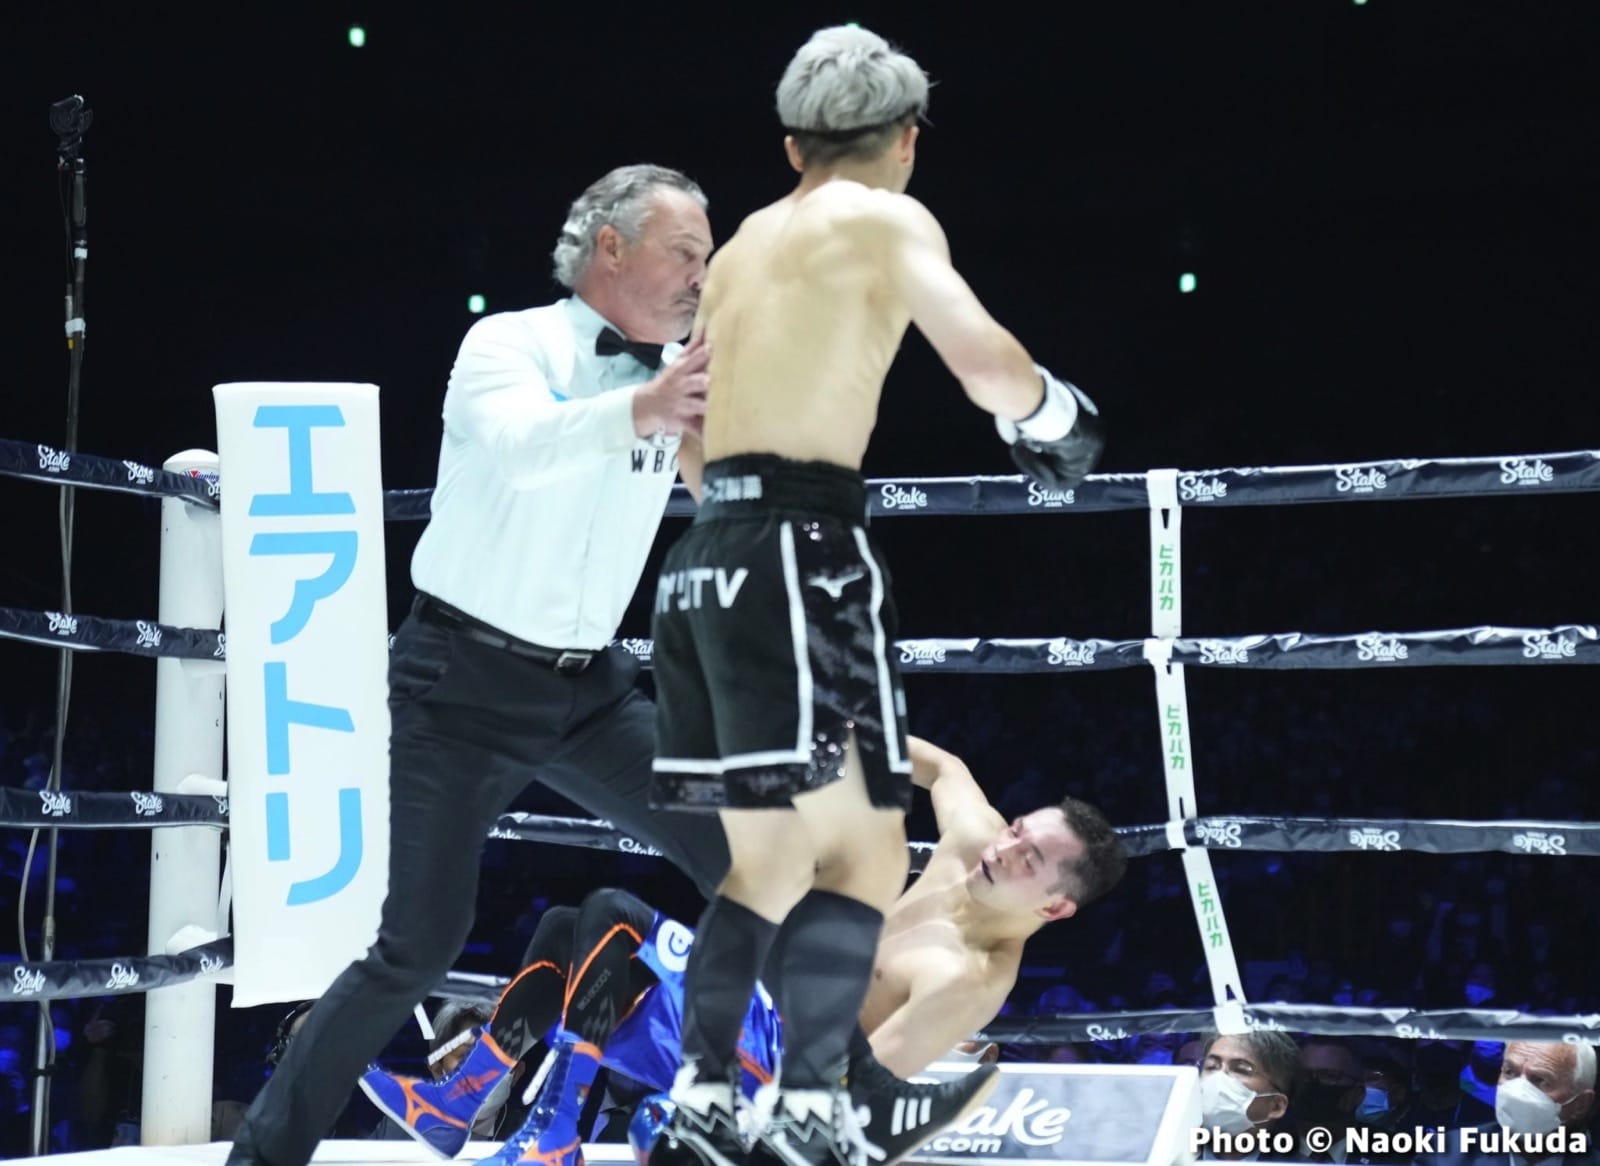 Inoue vs. Donaire II - LIVE action results from Saitama, Japan